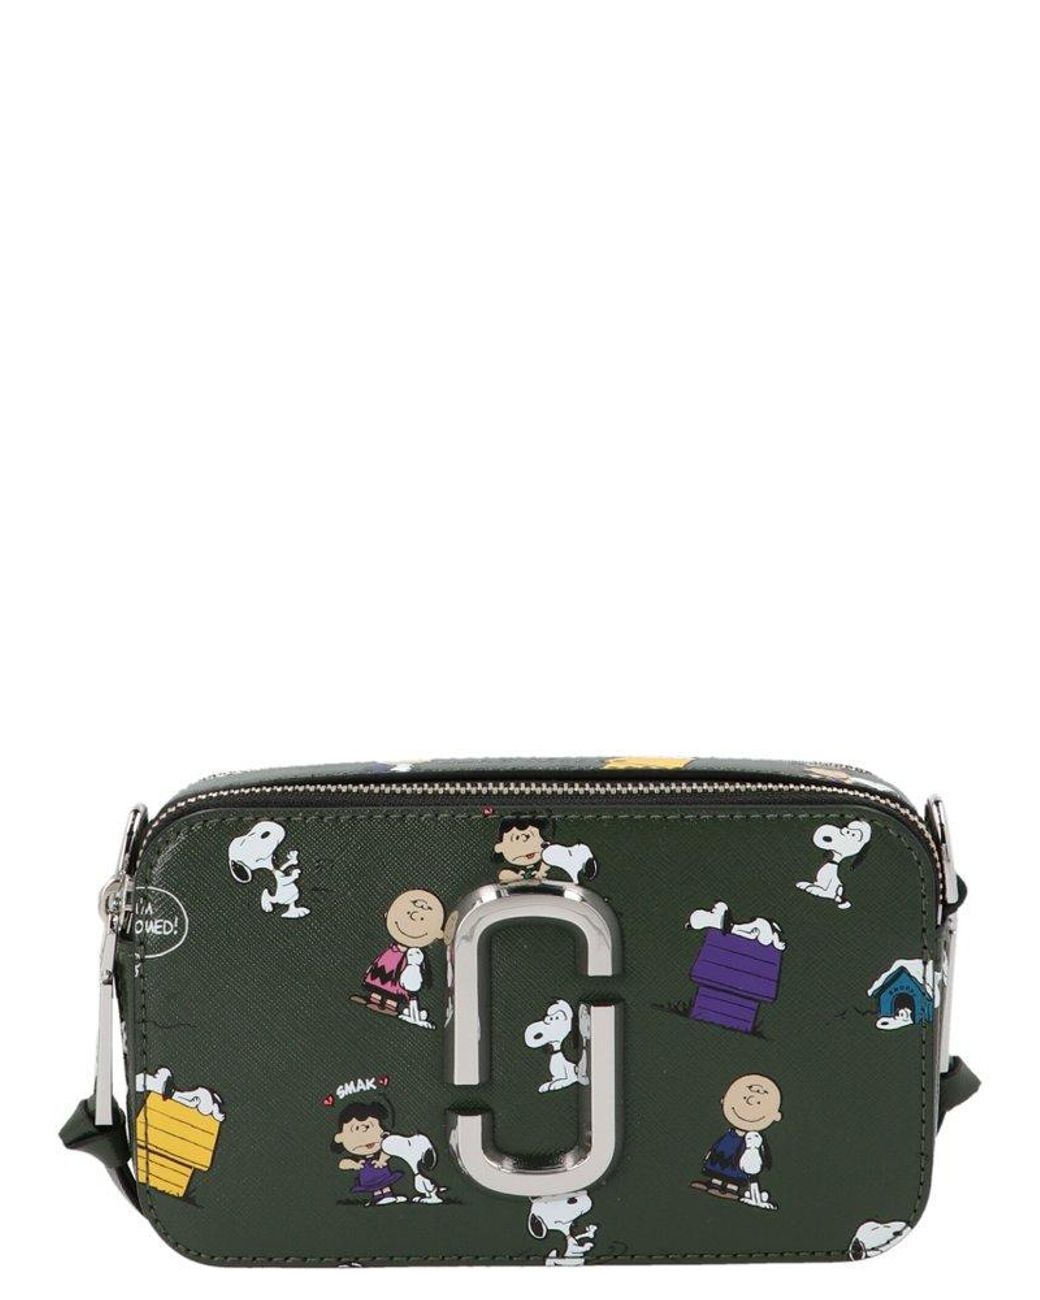 Marc Jacobs X Peanuts The Snapshot Camera Bag in Green | Lyst